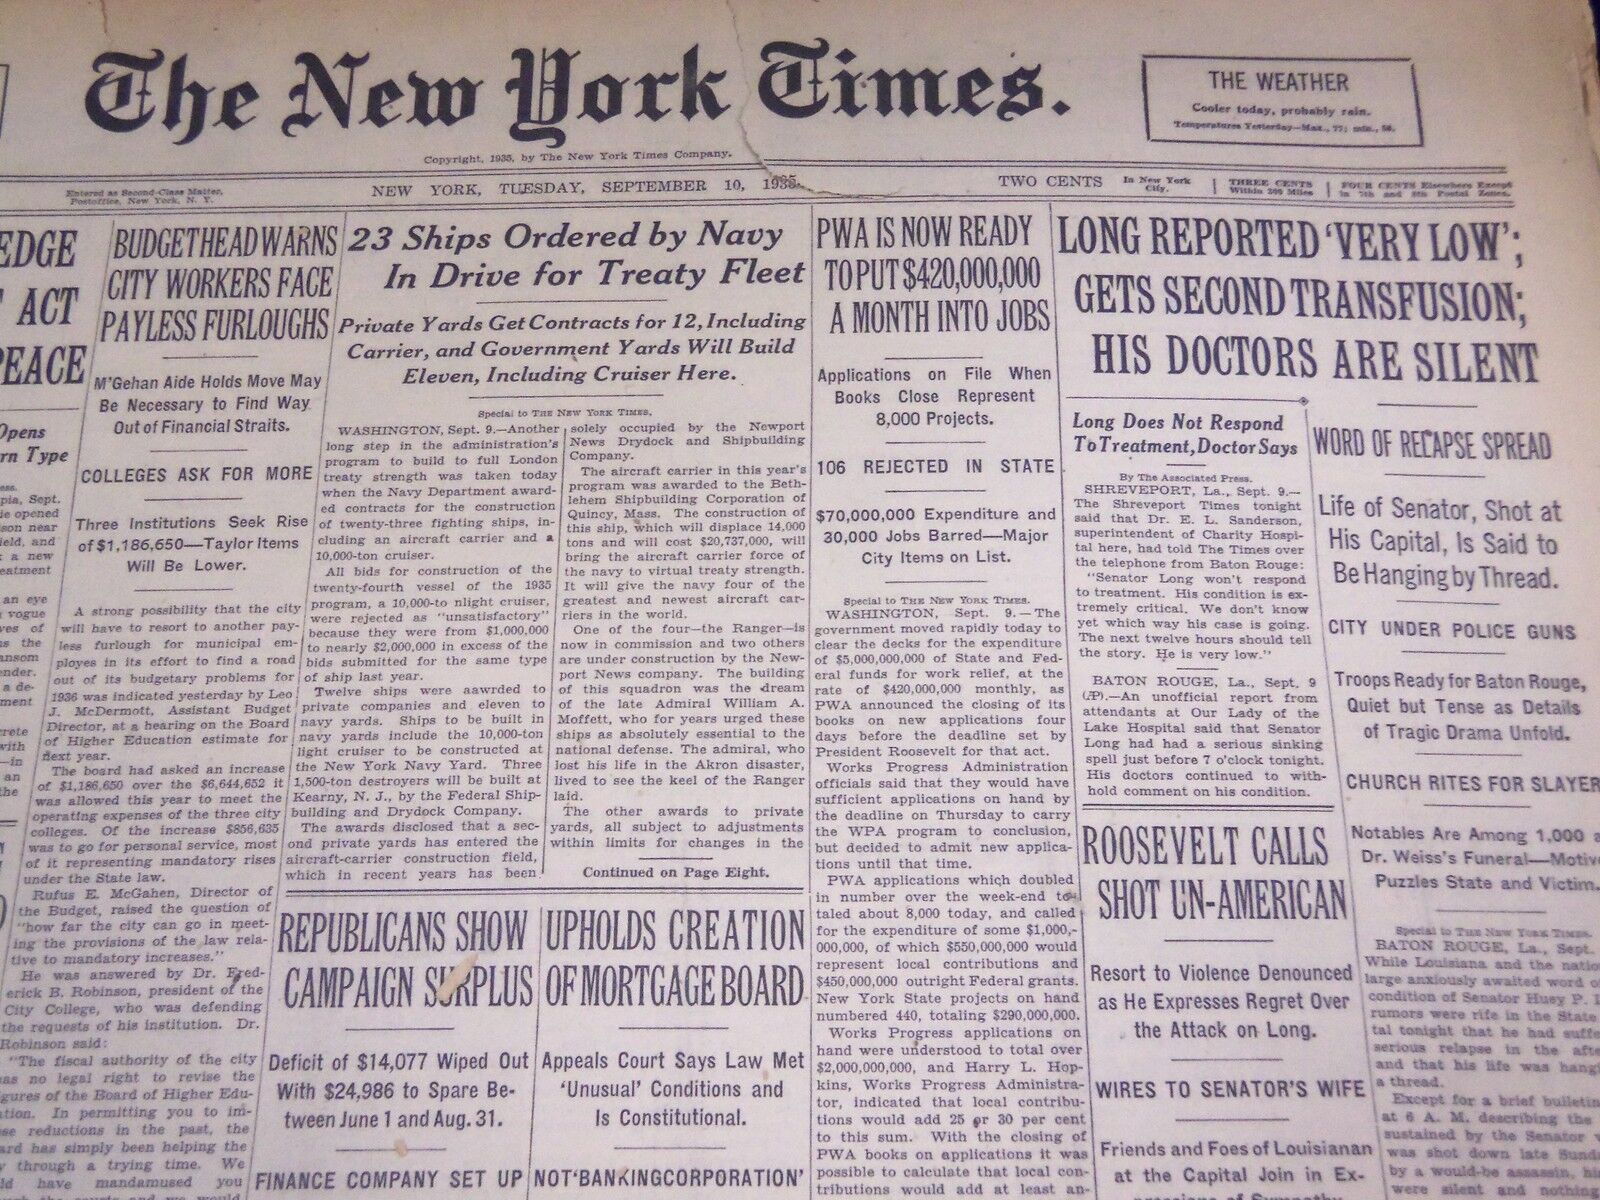 1935 SEPTEMBER 10 NEW YORK TIMES - LOU REPORTED VERY LOW - NT 1955